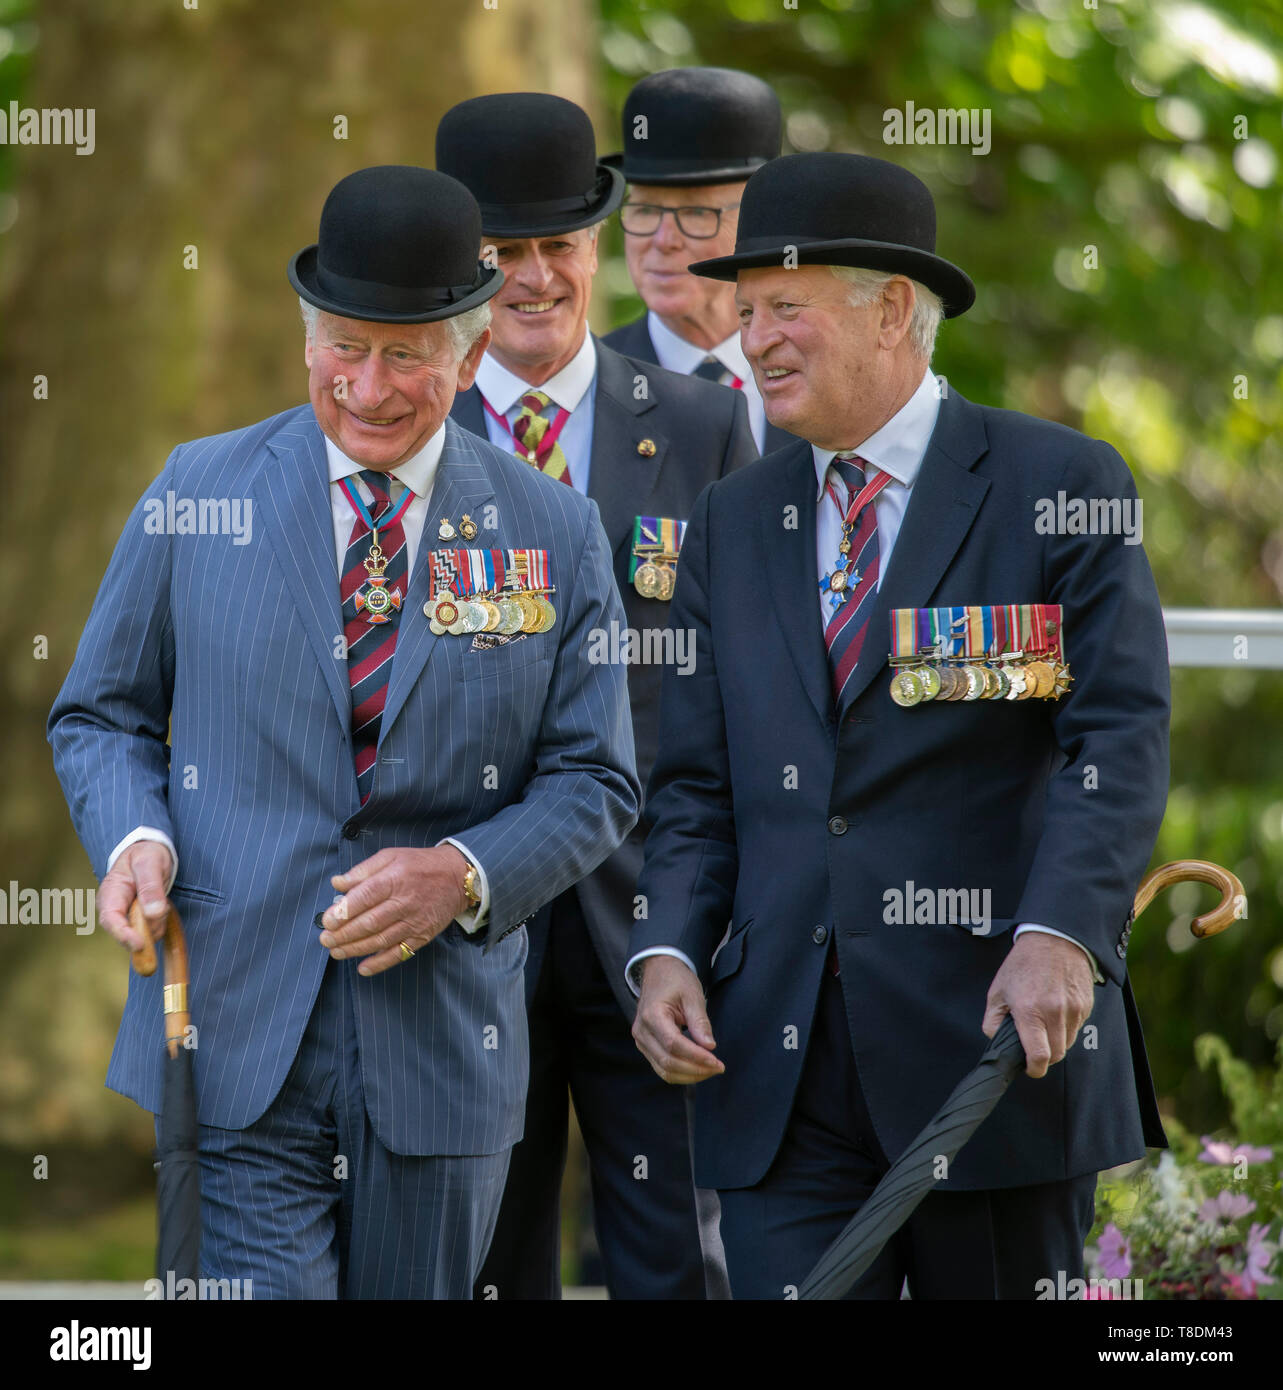 Hyde Park London, UK. 12th May 2019. HRH The Prince of Wales attends the Combined Cavalry Old Comrades Association Annual Parade and Service. Stock Photo